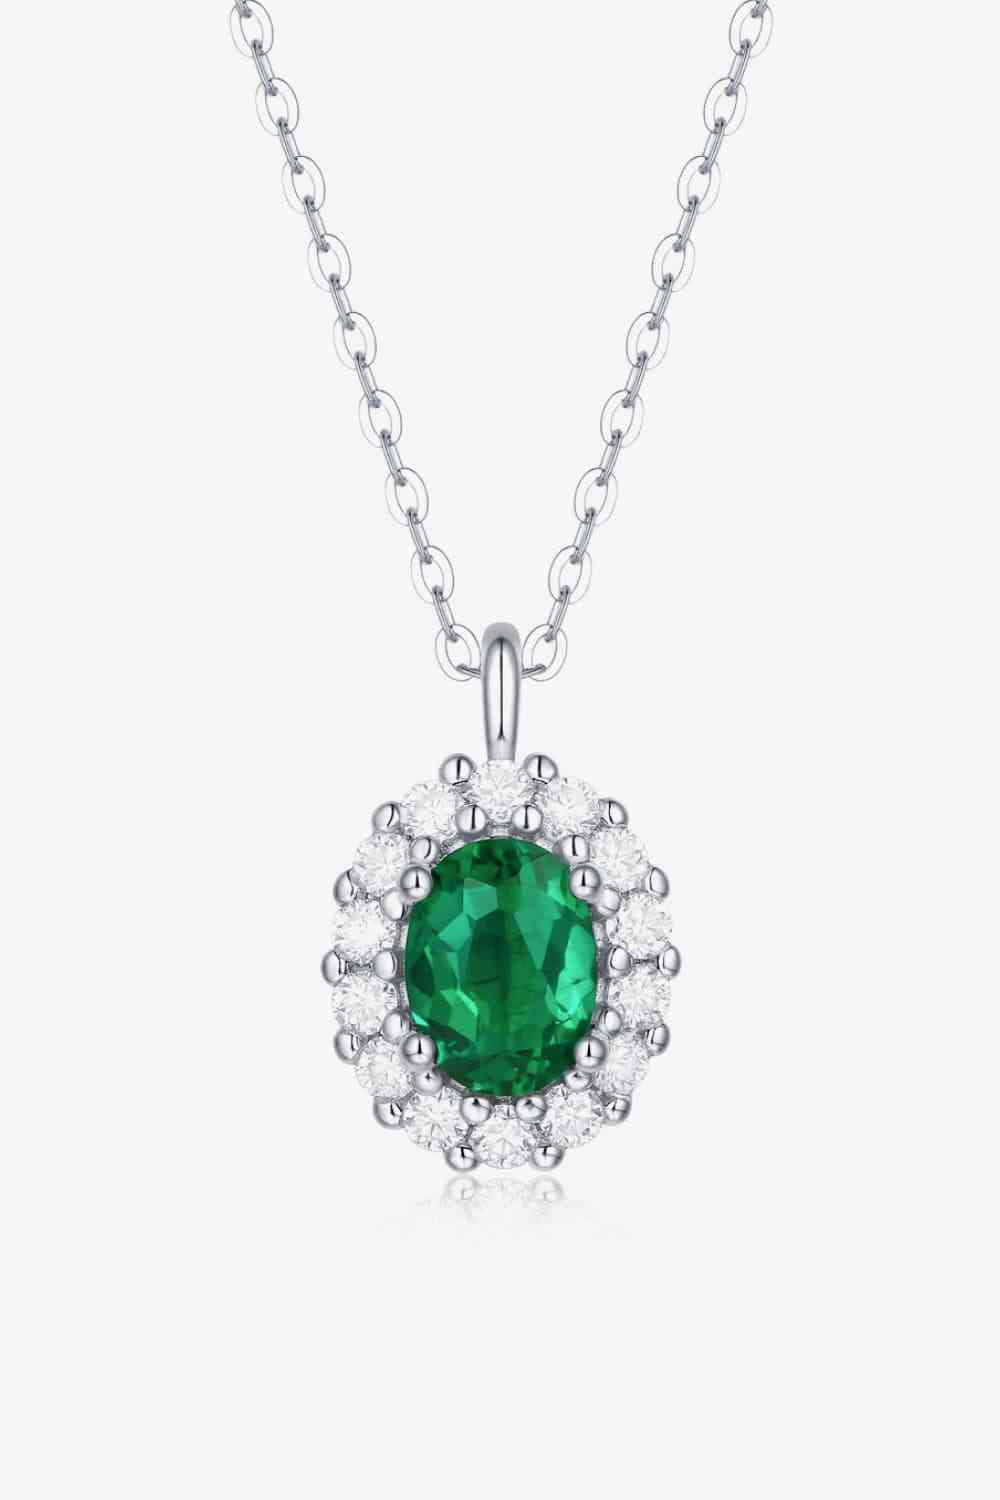 Ethereal Emerald Glow Necklace